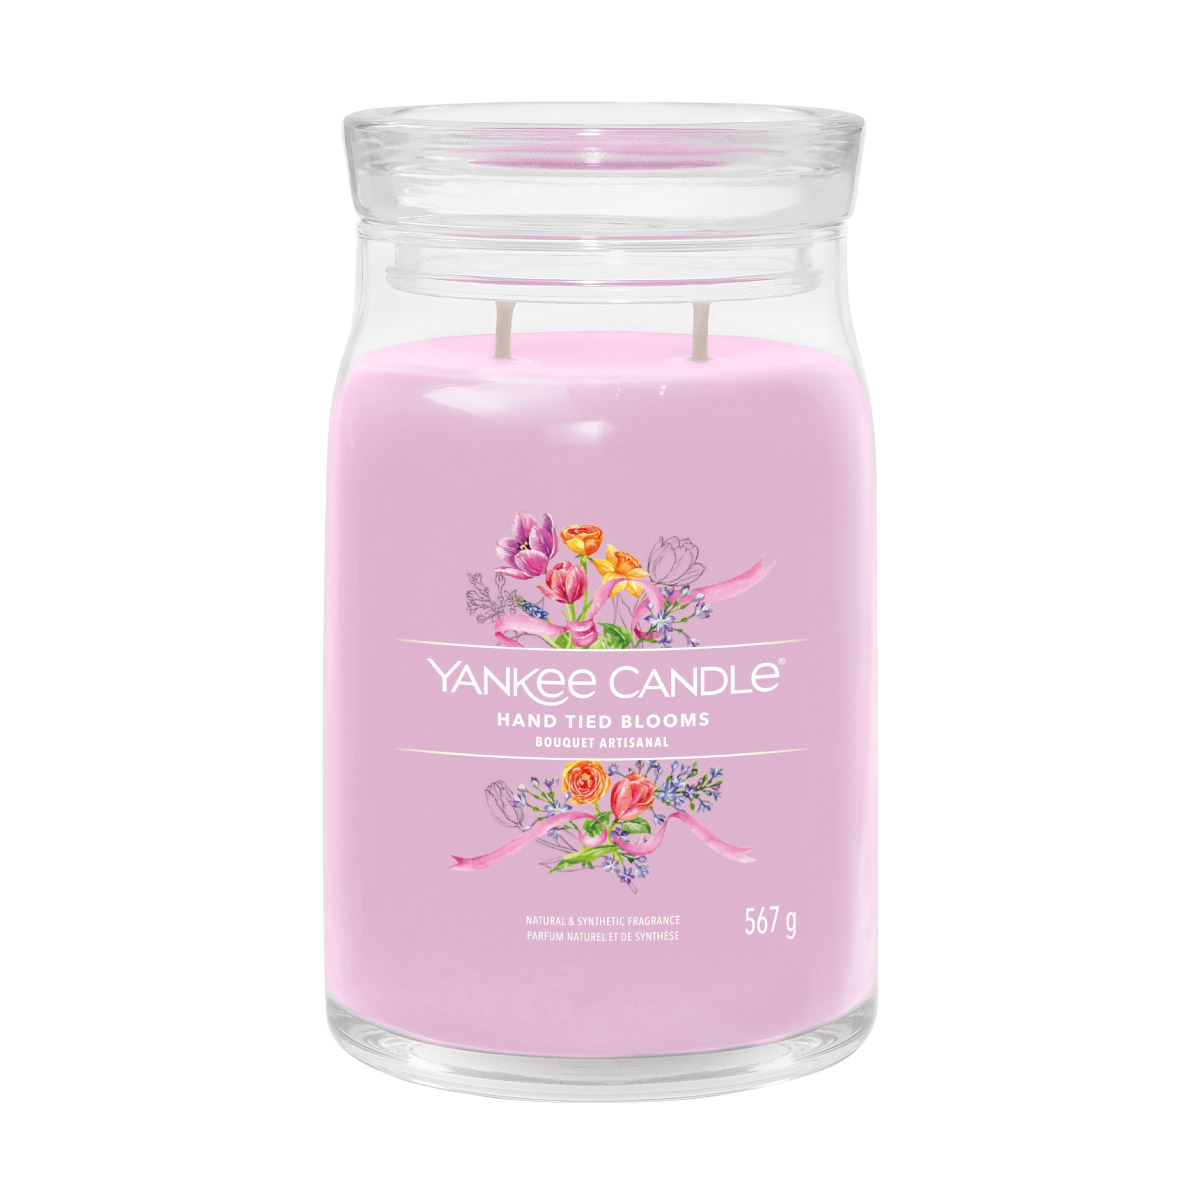 Hand Tied Blooms - Signature Duftkerze im Glas 567g - Yankee Candle®